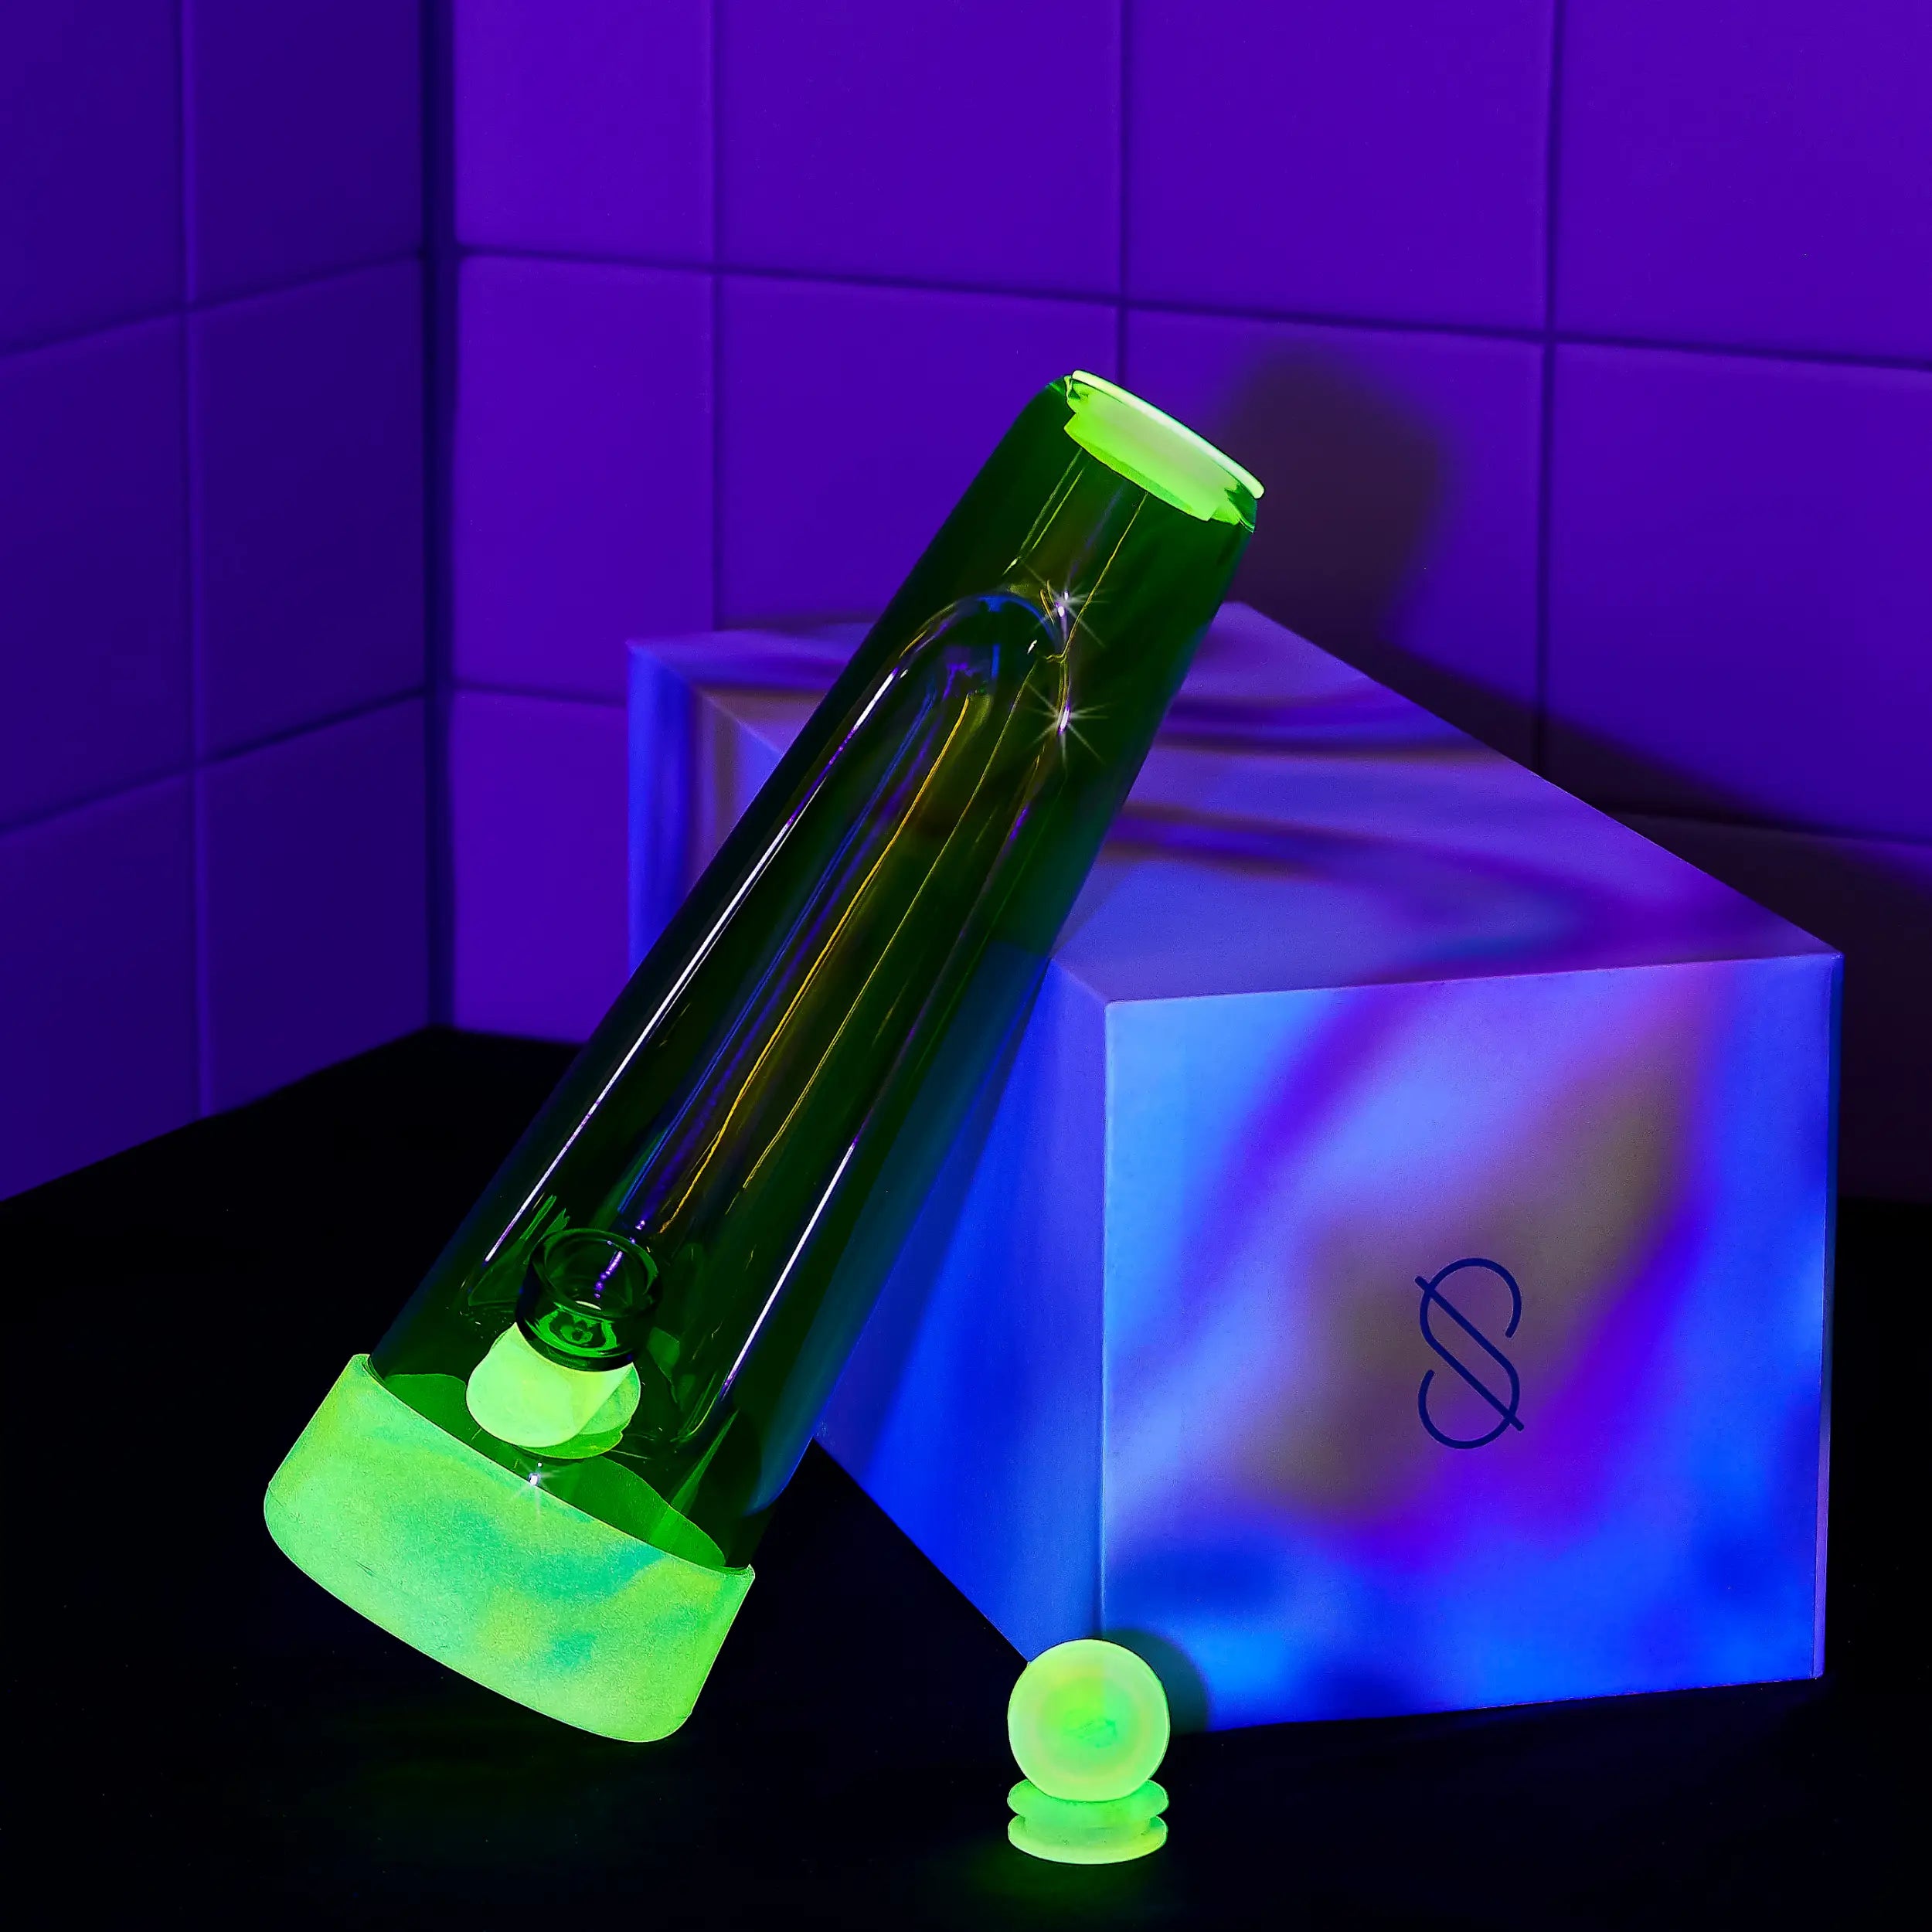 Elegance Meets Luminescence in the Designer Series Glow Green Bong.